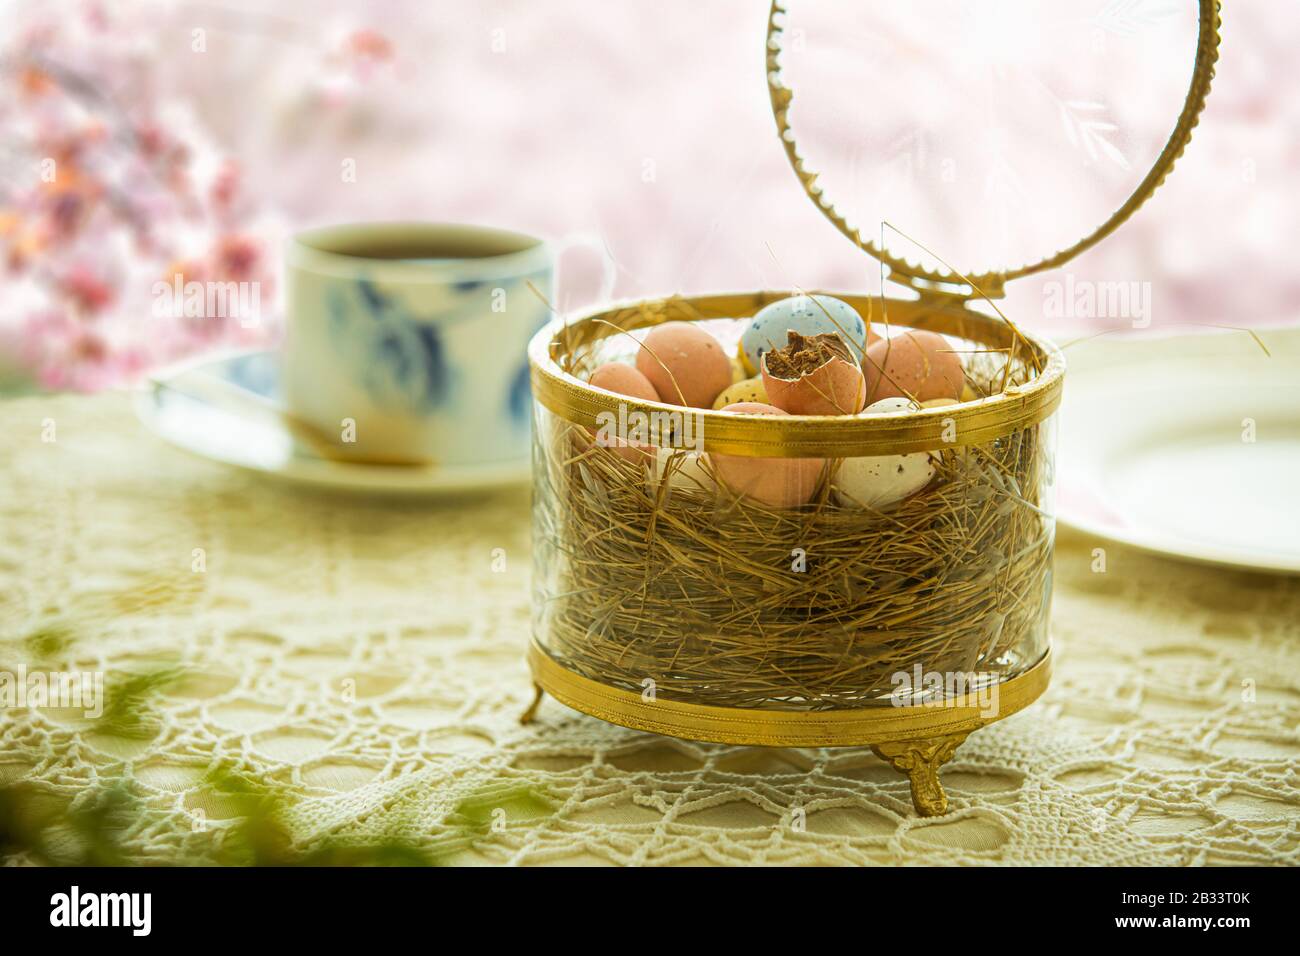 https://c8.alamy.com/comp/2B33T0K/beautiful-served-small-table-with-easter-decorations-on-outdoor-terrace-little-chocolate-bunny-with-bow-chocolate-eggs-cup-of-coffee-crystal-bowl-2B33T0K.jpg